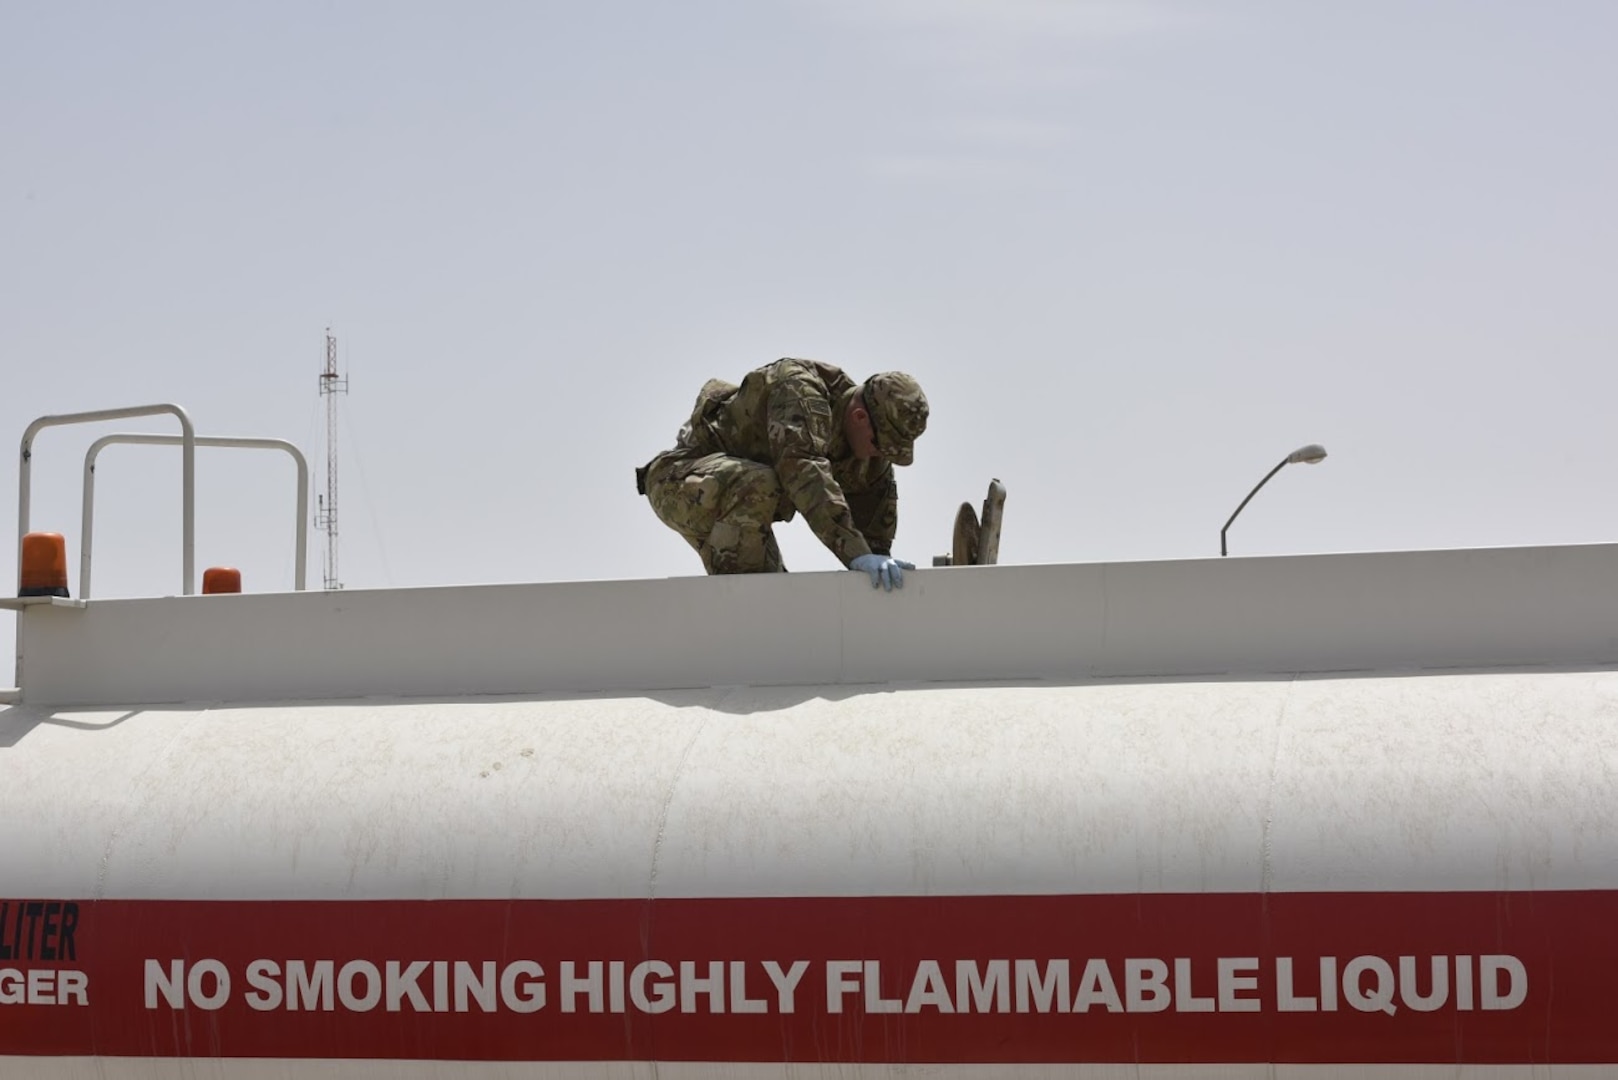 Staff Sgt. Samuel Bonhorst, 407th Expeditionary Logistic Readiness Squadron petroleum, oil and lubricants flight fuels laboratory NCO in charge, drops a jar in a fuel truck to gather a sample before receiving a shipment May 10, 2017, in Southwest Asia. Fuel technicians maintain all POL substances, from diesel and gasoline to jet fuel and liquid oxygen. These materials play a vital role in delivering airpower to the fight against ISIS. The team here at the 407th Air Expeditionary Group supplies U.S. Marine Corps and coalition aircraft. (U.S. Air Force photo by Senior Airman Ramon A. Adelan)